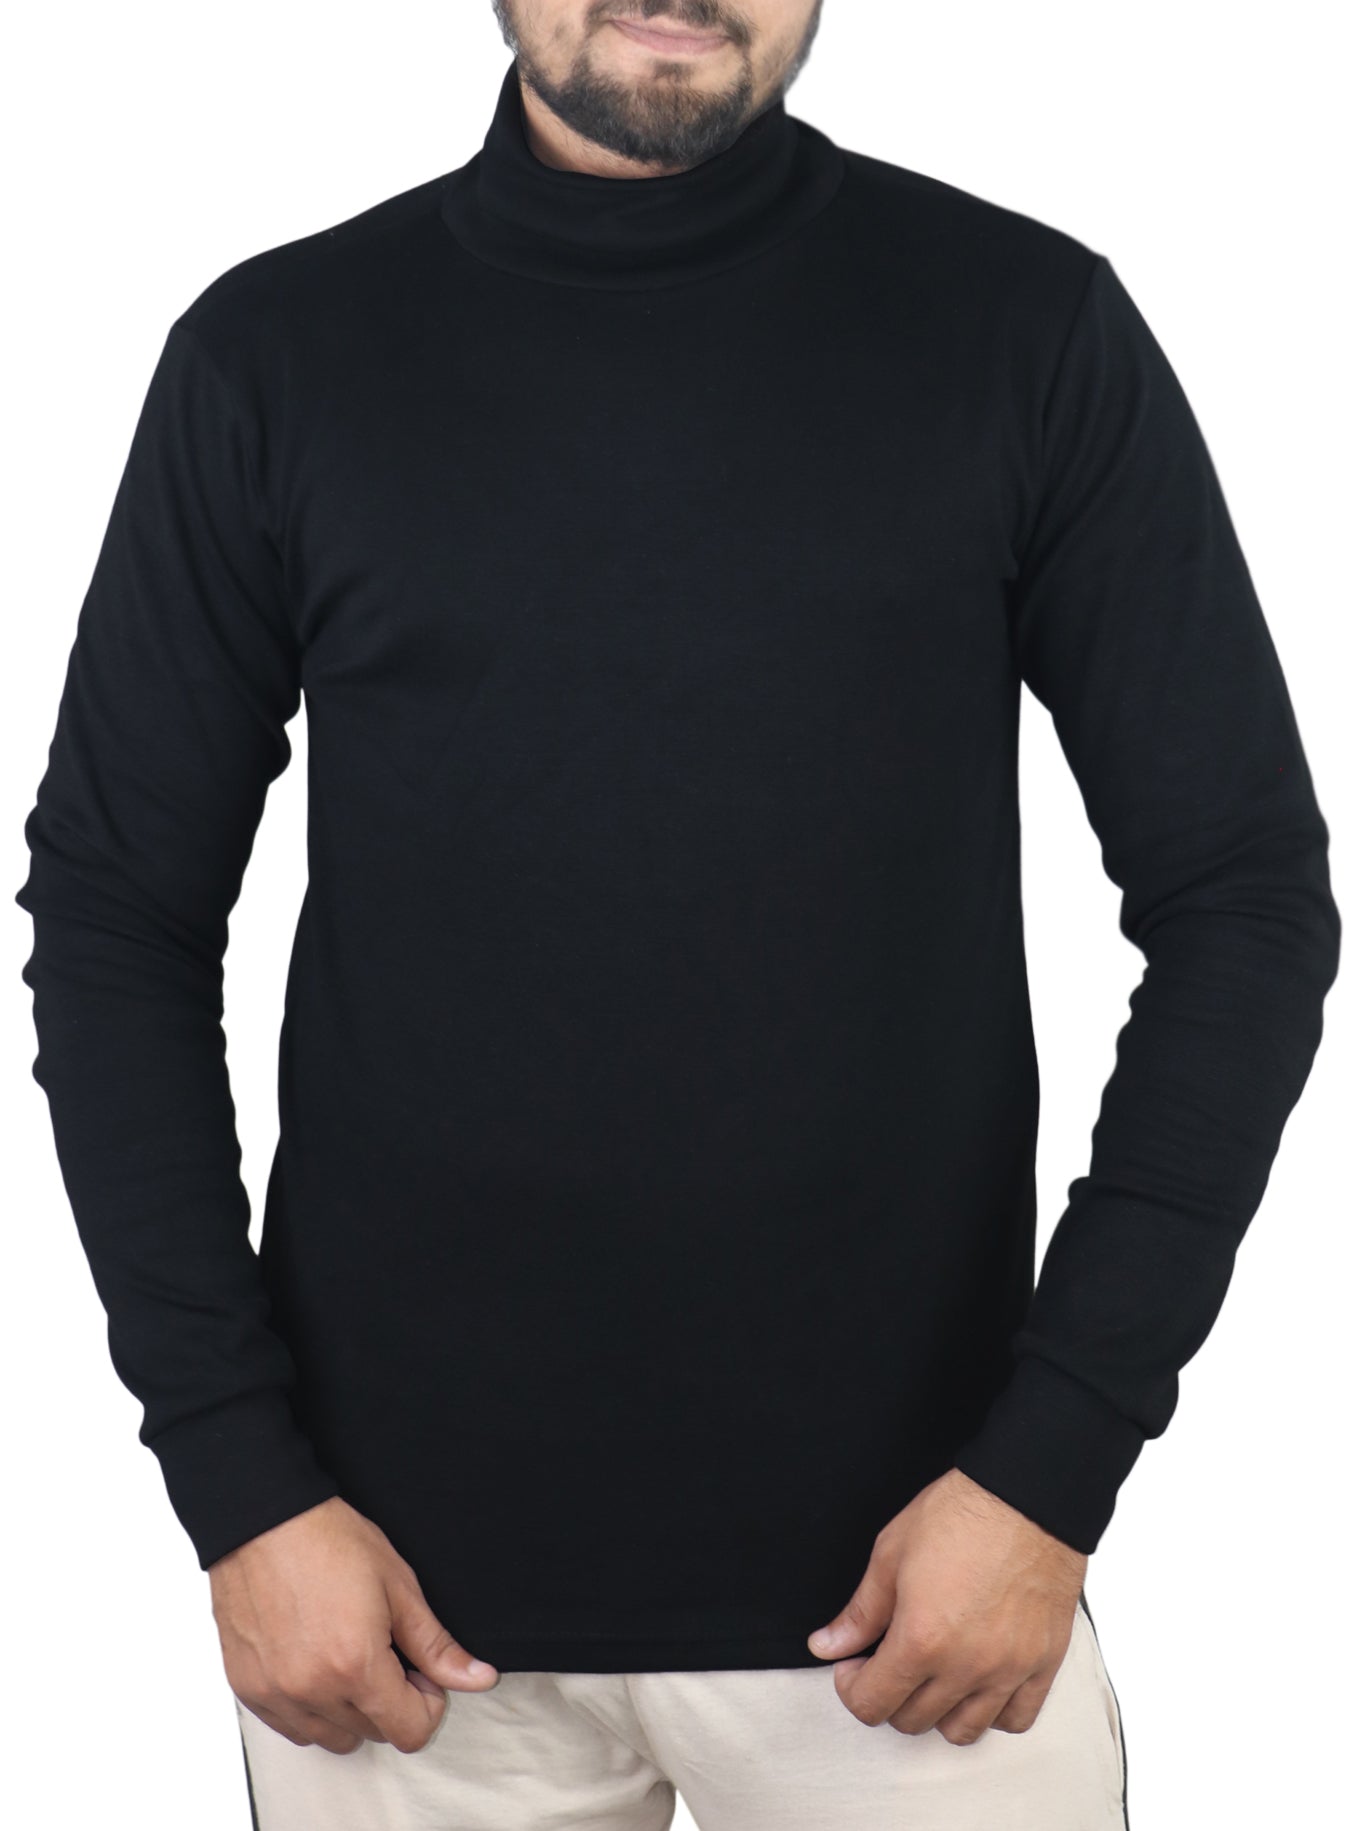 Bahob® Menswear Turtle neck Slim Fit High Neck Classic Cotton Long Sleeve Pullover Sweater. - Bahob